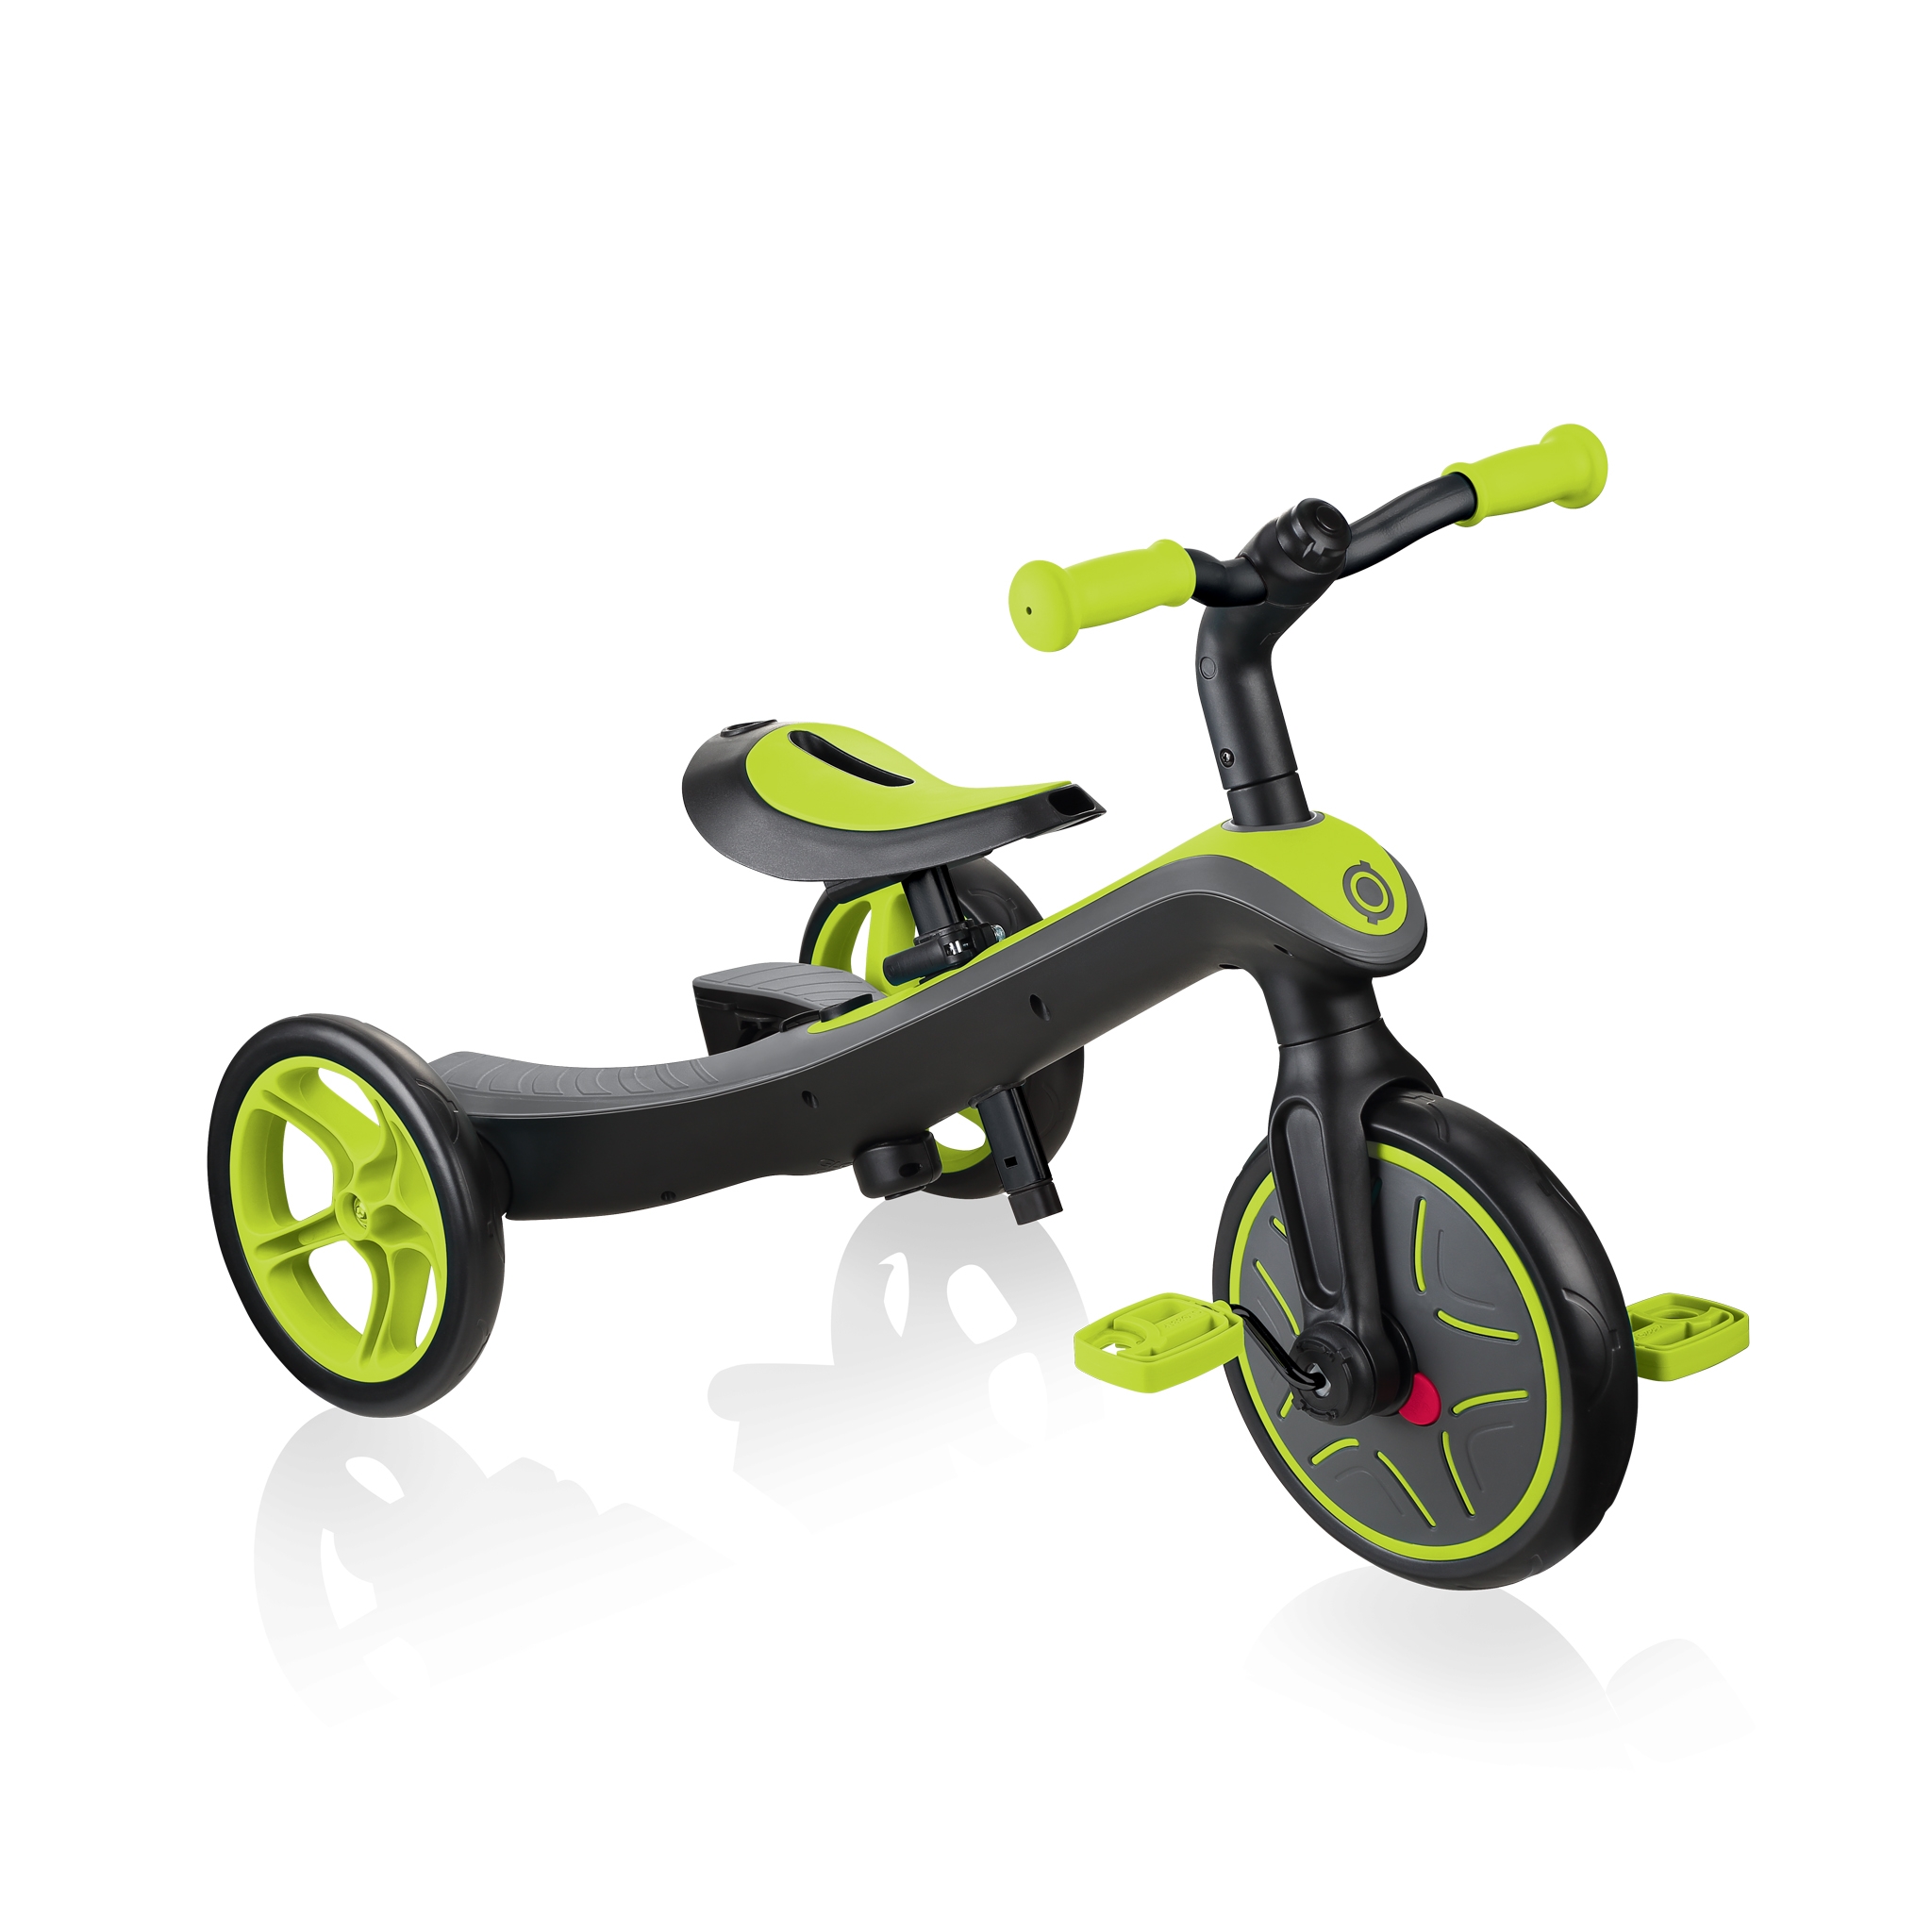 Globber-EXPLORER-TRIKE-2in1-all-in-one-training-tricycle-and-kids-balance-bike-stage1-training-trike_lime-green 0